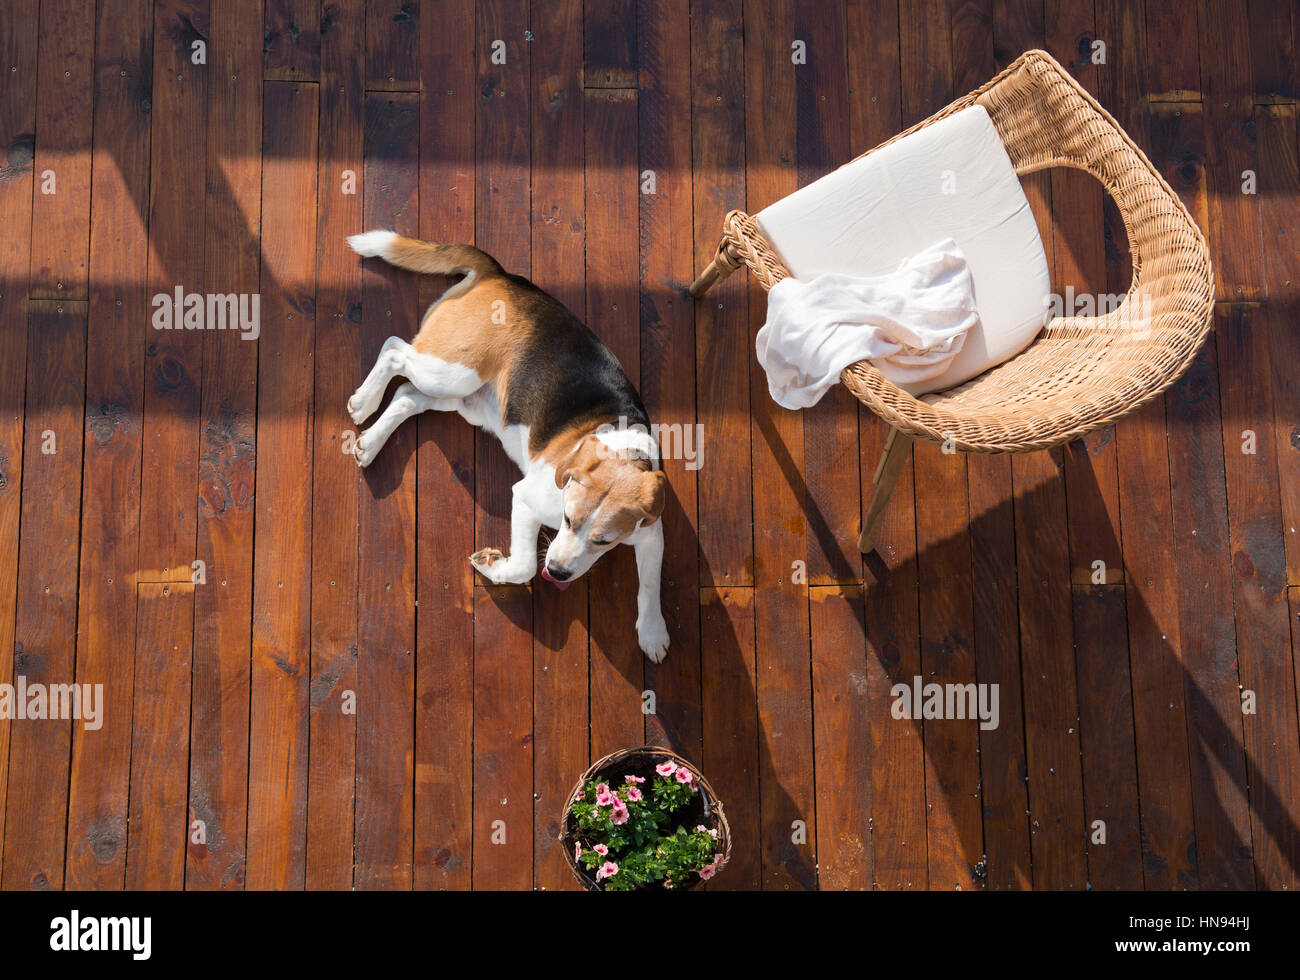 Dog lying on wooden terrace. Rattan chair and flower pot. Stock Photo